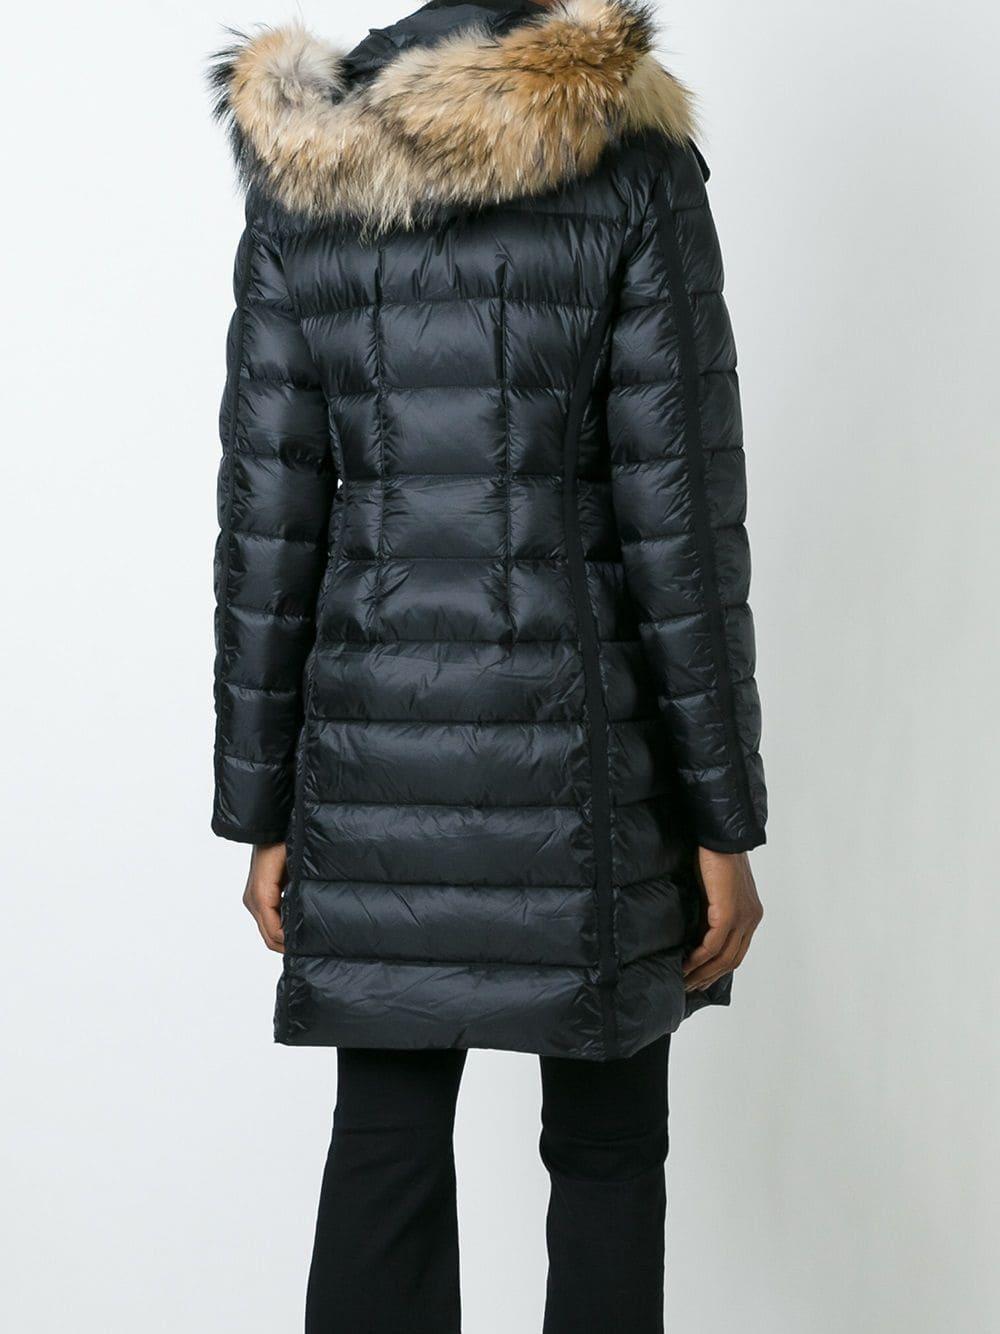 Moncler Synthetic Hermifur Jacket in Black - Lyst